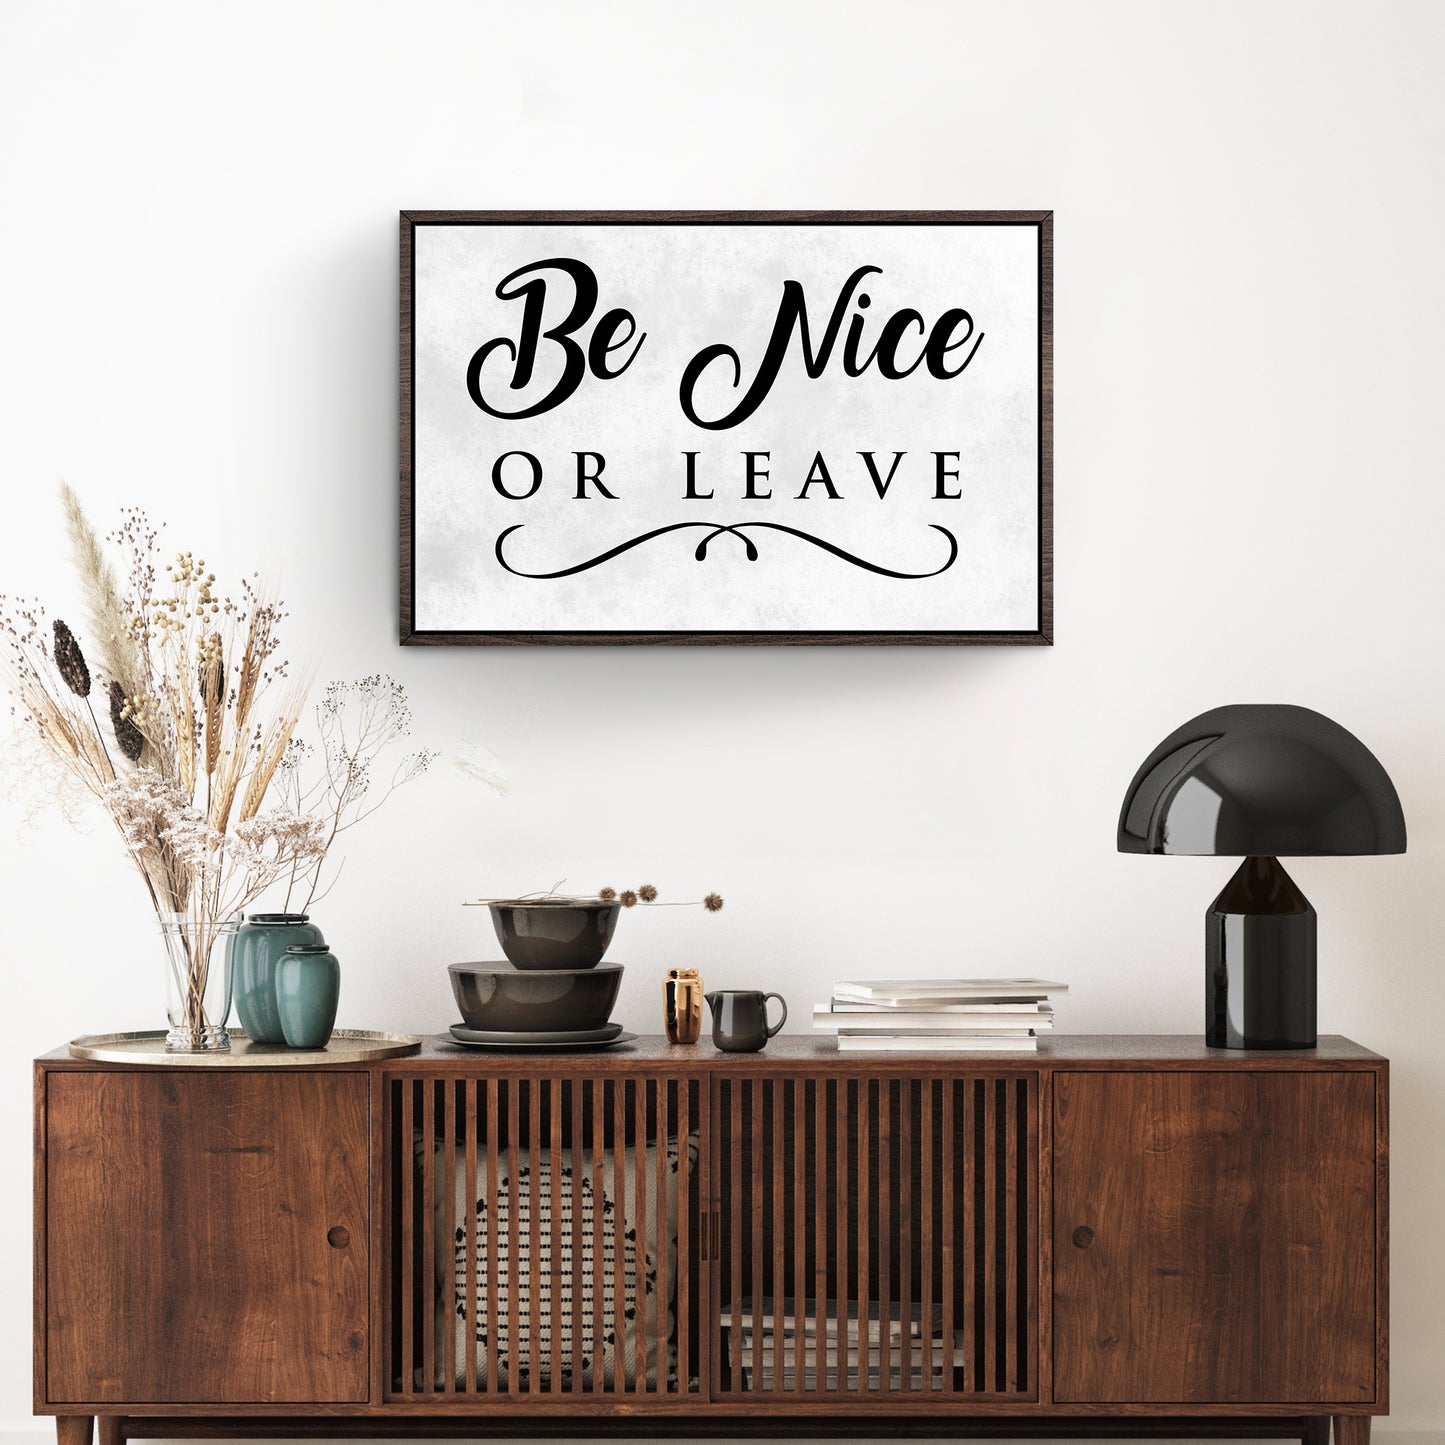 Be Nice Or Leave Sign - Image by Tailored Canvases